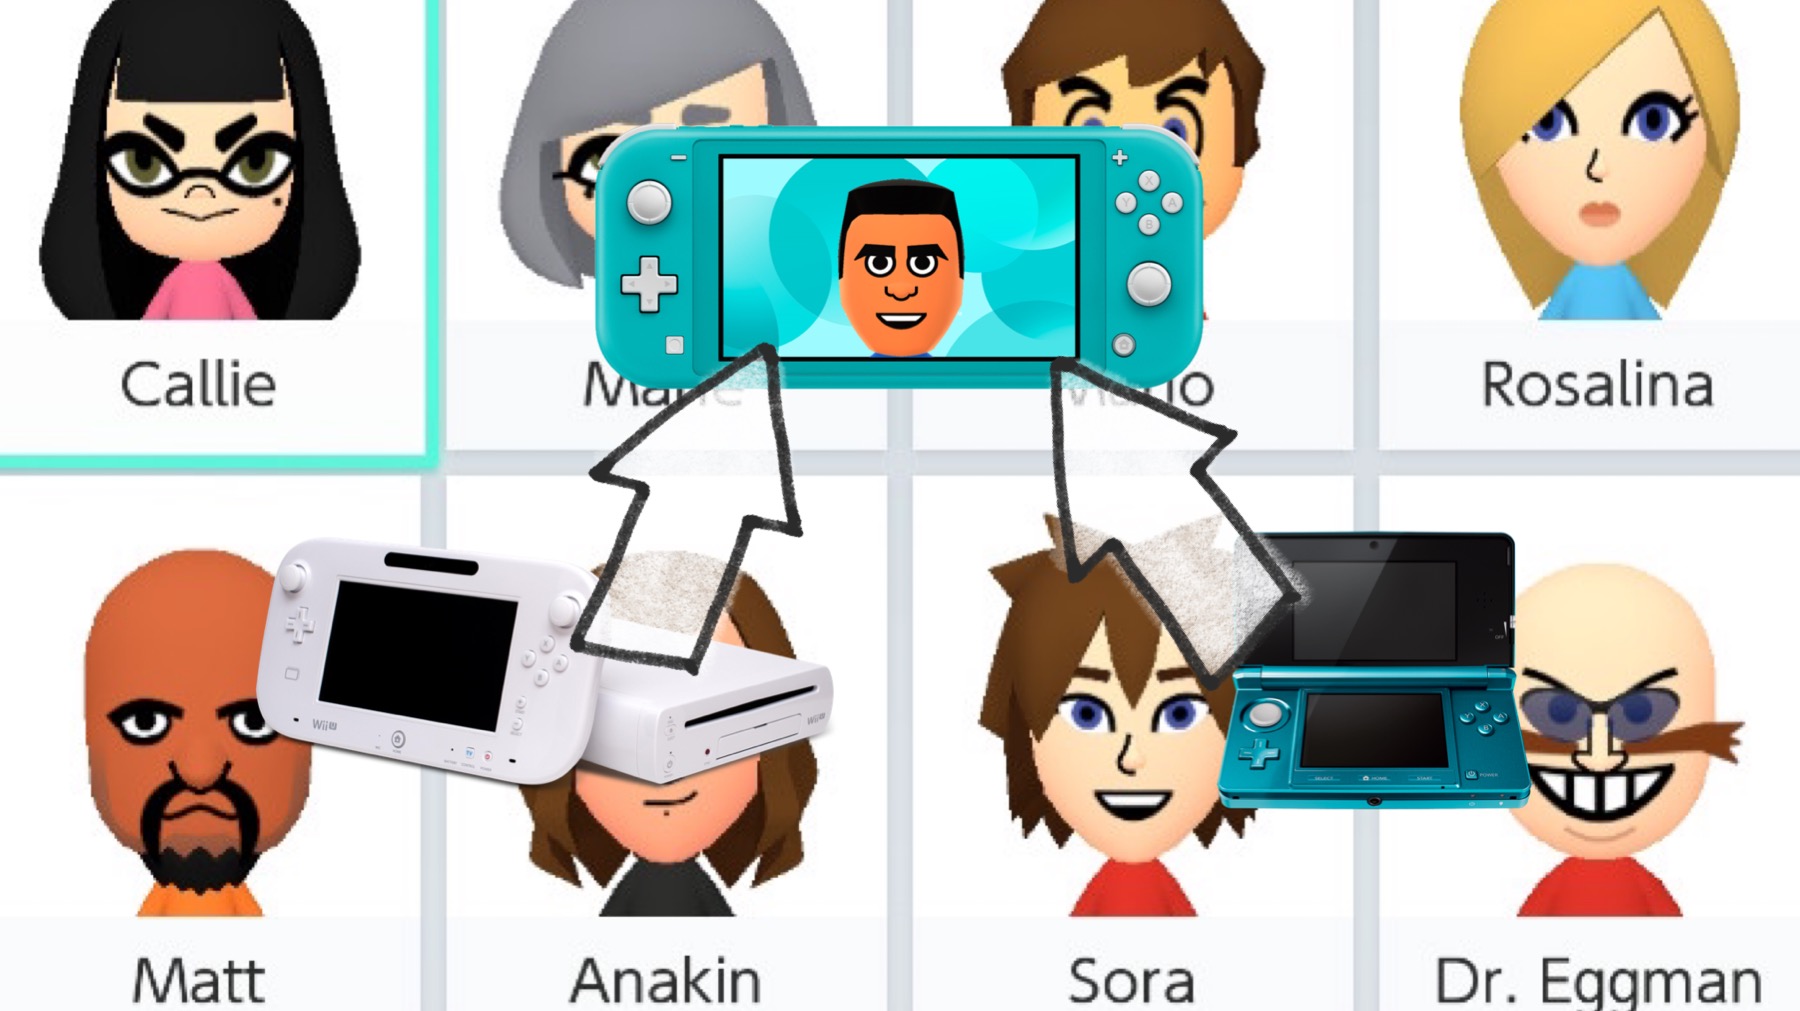   - Famous Miis for the Wii U, Wii,  3DS, and Miitomo App - QR Codes and Instructions